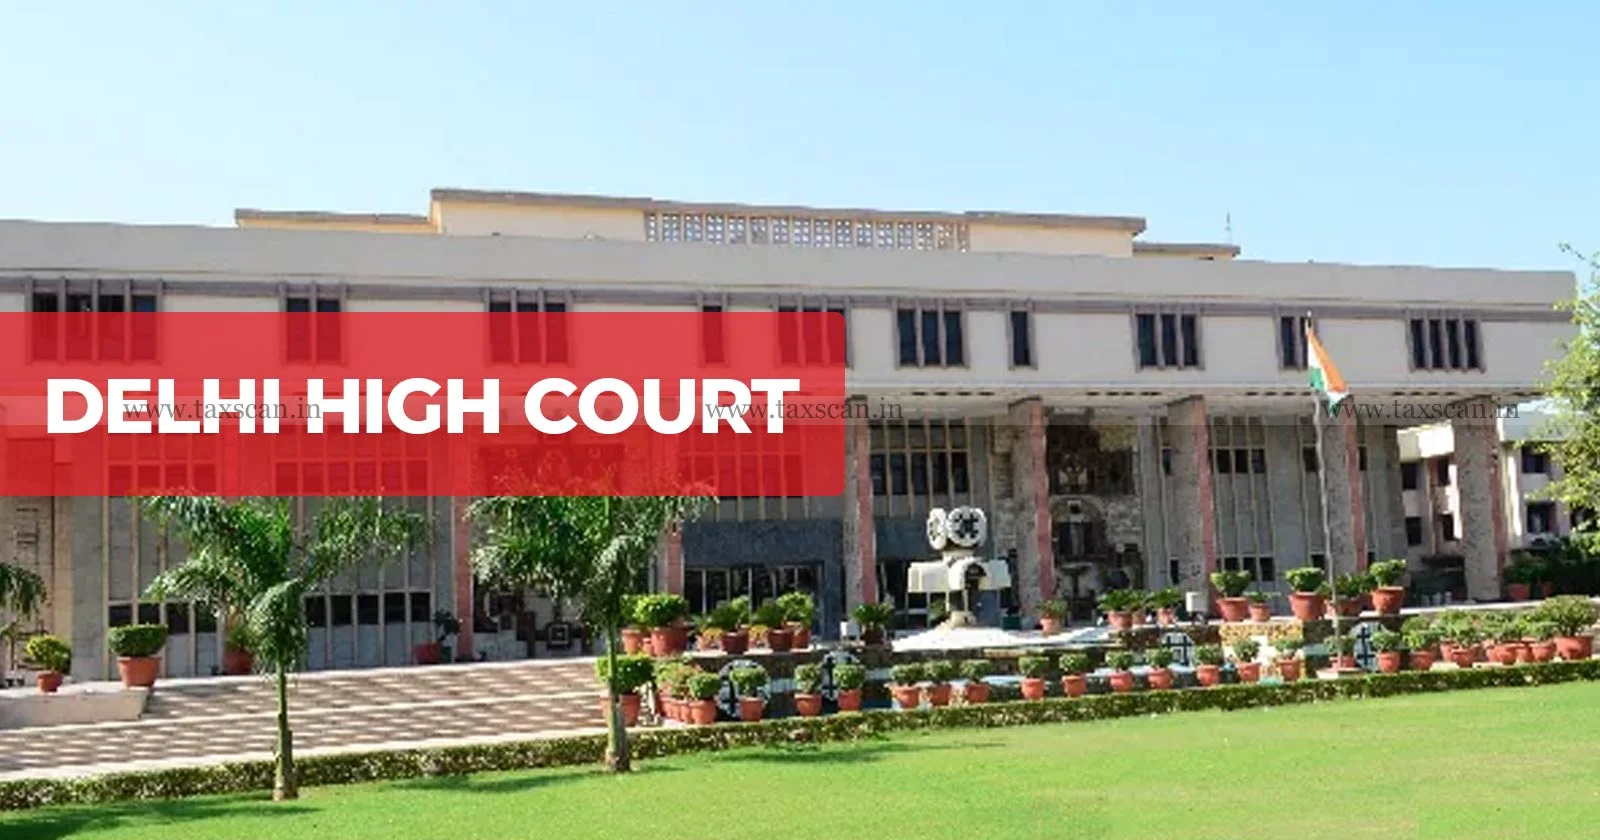 High - Court - cant - decide - on - Taxability - of - Payments - Centralized - Services - supreme - Court - Delhi - HC - TAXSCAN